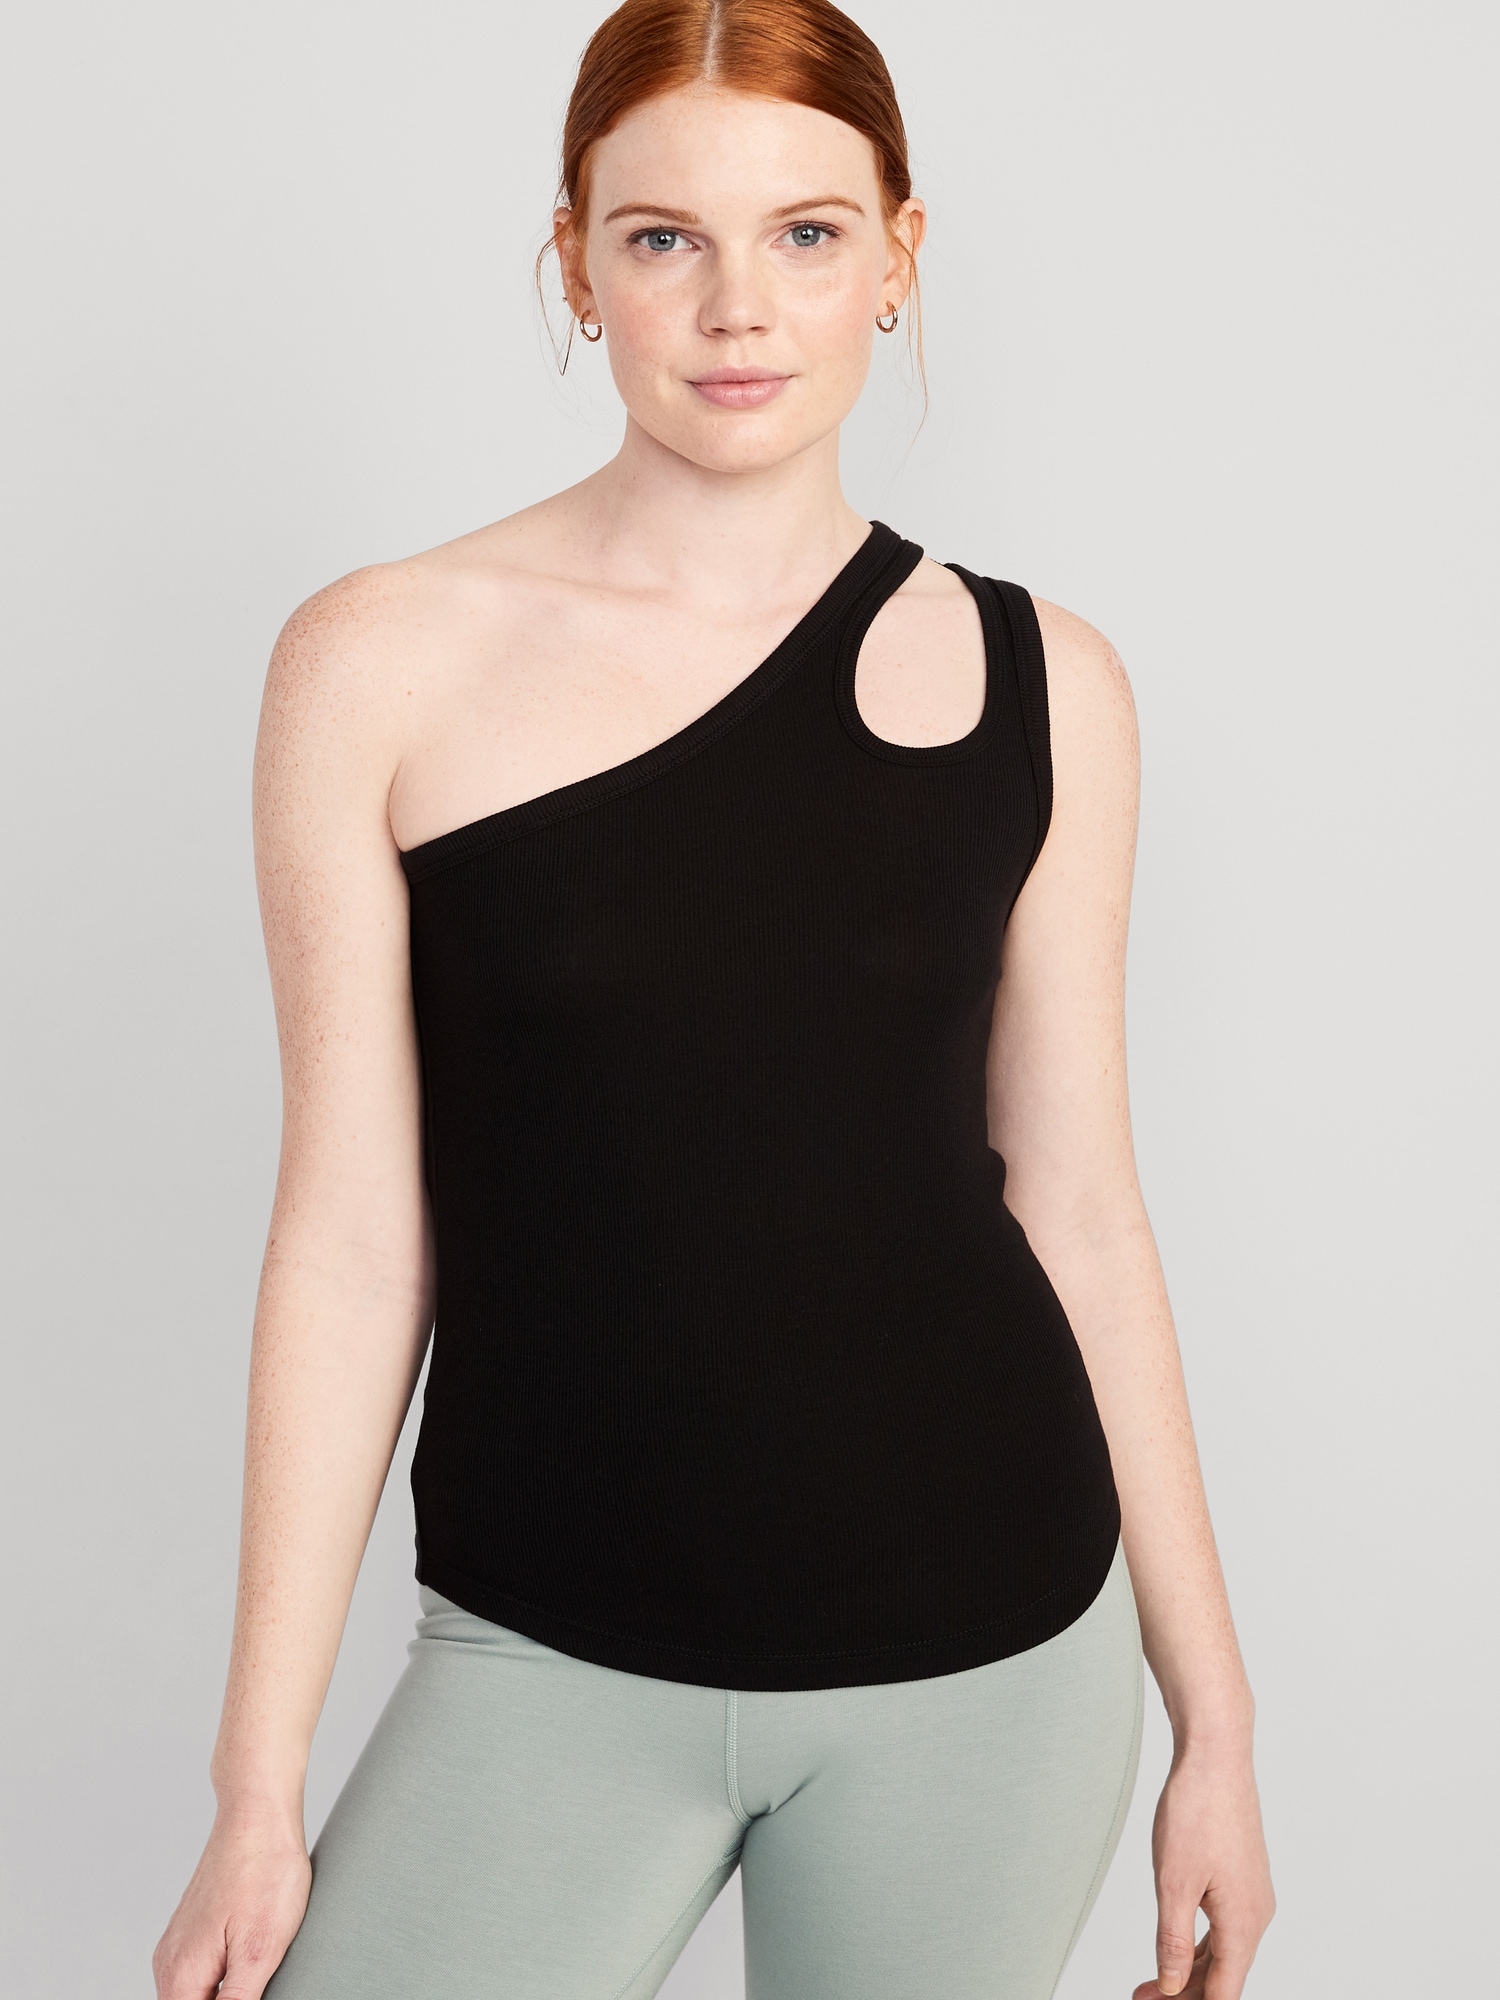 Old Navy UltraLite All-Day One-Shoulder Cutout Tank Top for Women black. 1